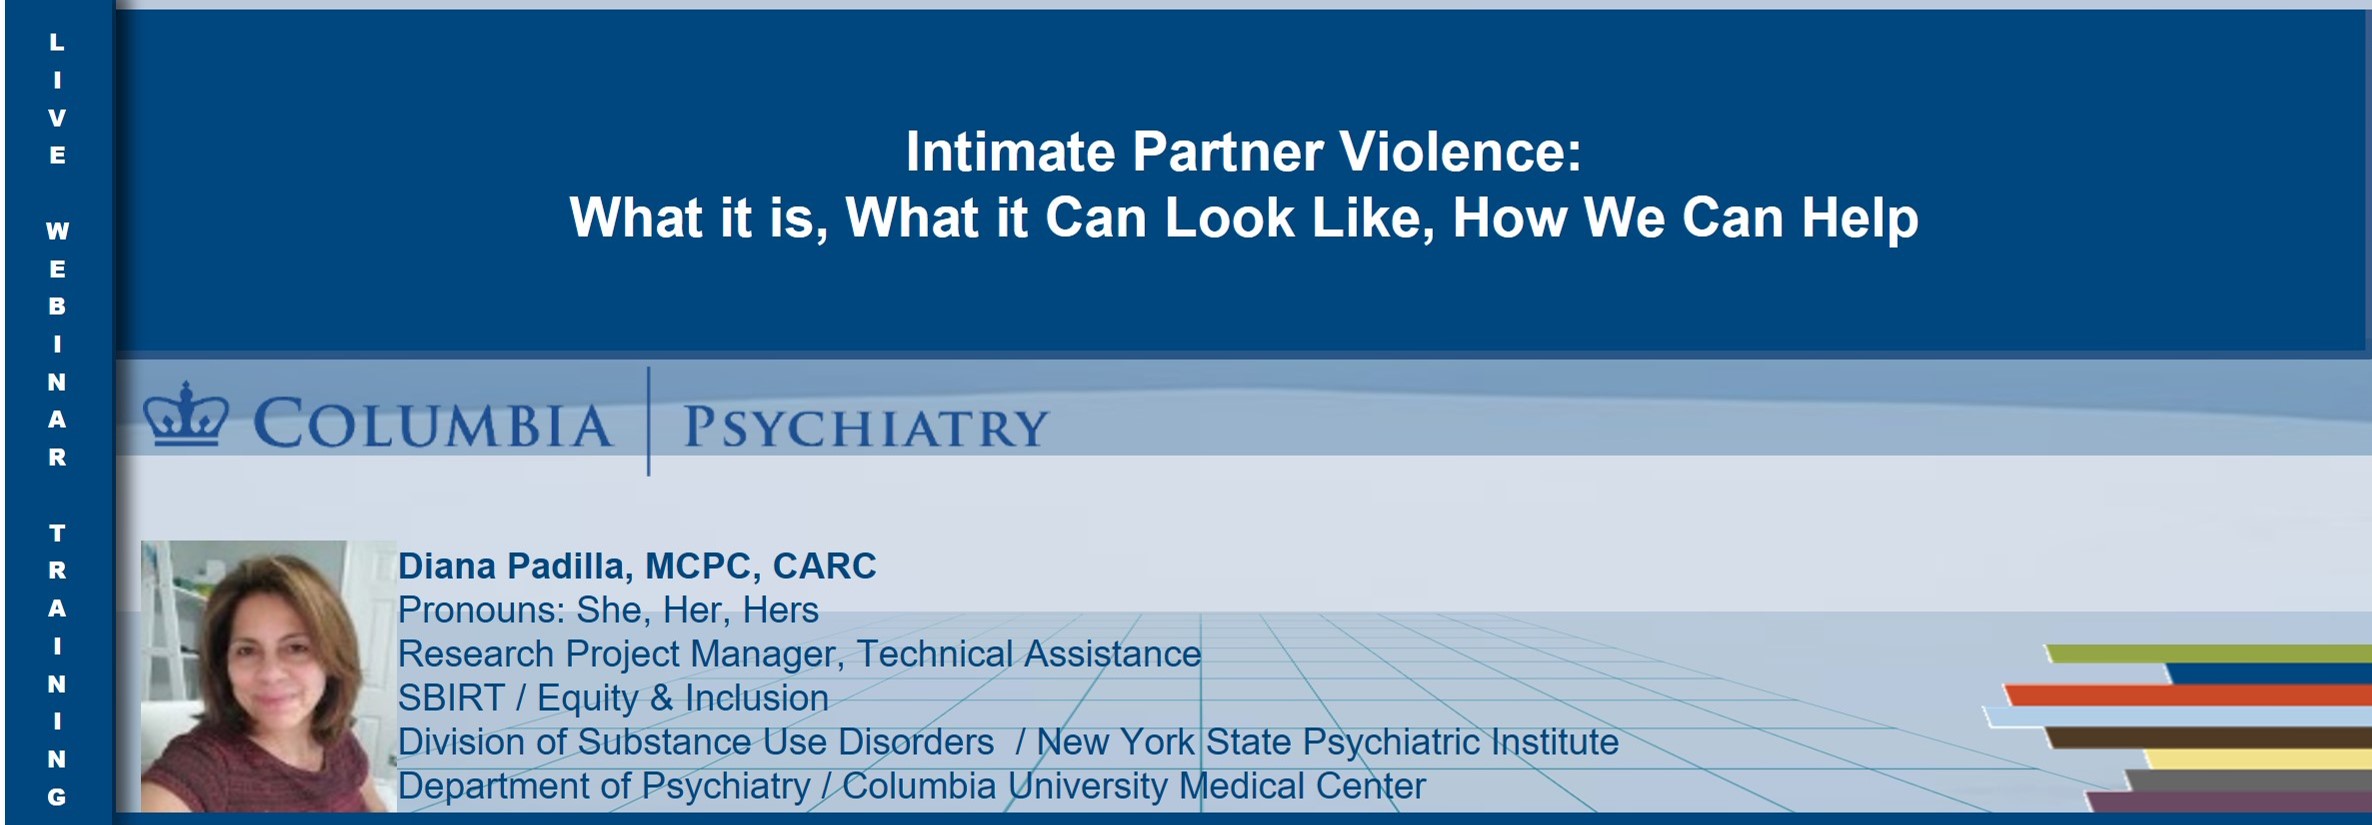 Title: Intimate Partner Violence: What it is, What it Can Look Like, How We Can Help